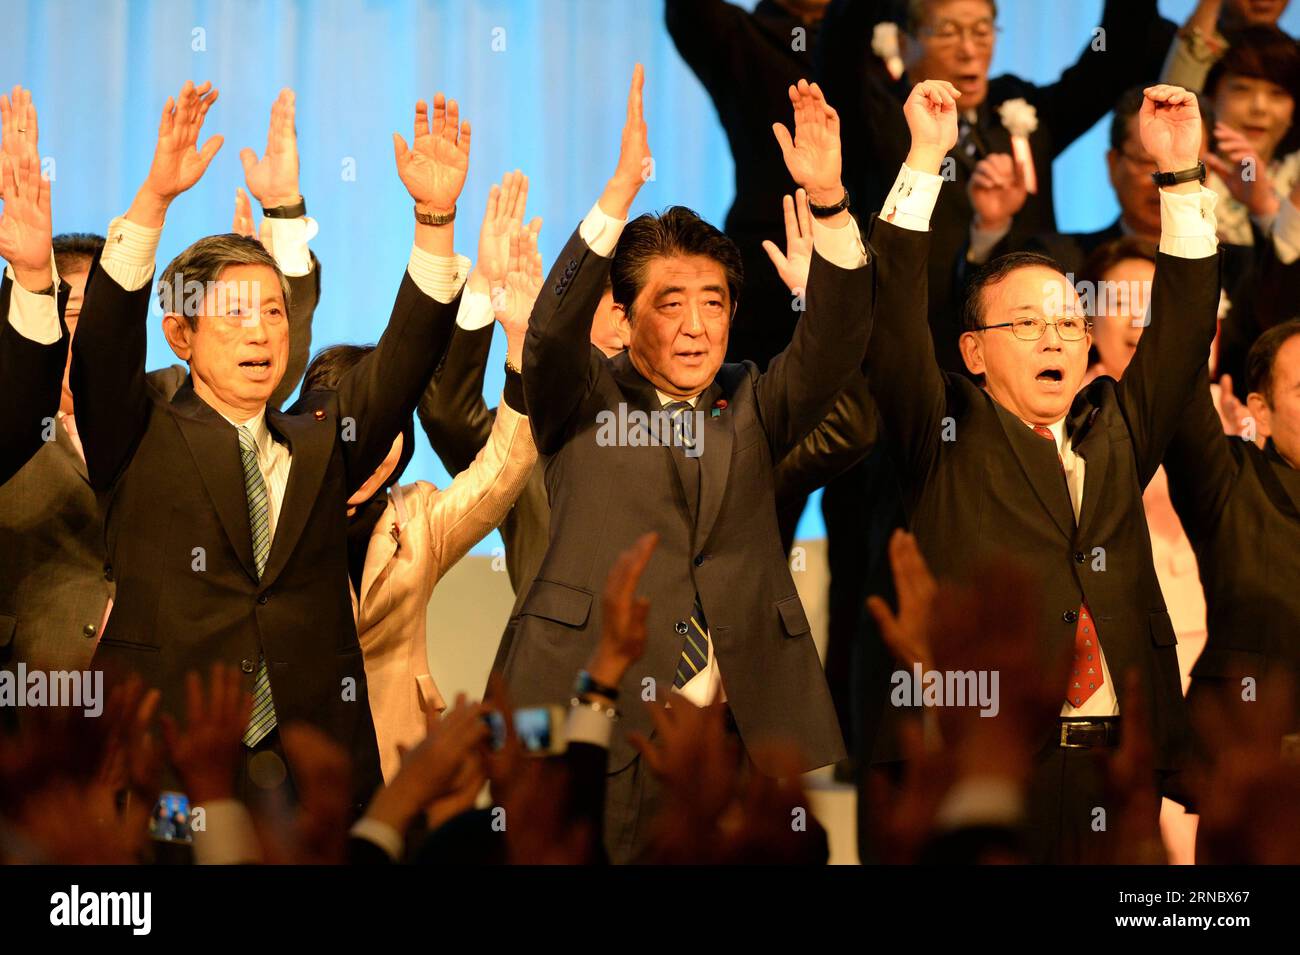 (160313) -- TOKYO, March 13, 2016 -- Japanese Prime Minister Shinzo Abe (C) shouts slogans with members of his ruling Liberal Democratic (LDP) Party during its annual convention in Tokyo, Japan, March 13, 2016. The LDP held its 83rd convention here on Sunday. ) JAPAN-POLITICS-LDP-ANNUAL CONVENTION MaxPing PUBLICATIONxNOTxINxCHN   Tokyo March 13 2016 Japanese Prime Ministers Shinzo ABE C Shouts Slogans With Members of His ruling Liberal Democratic LDP Party during its Annual Convention in Tokyo Japan March 13 2016 The LDP Hero its 83rd Convention Here ON Sunday Japan POLITICS LDP Annual Convent Stock Photo